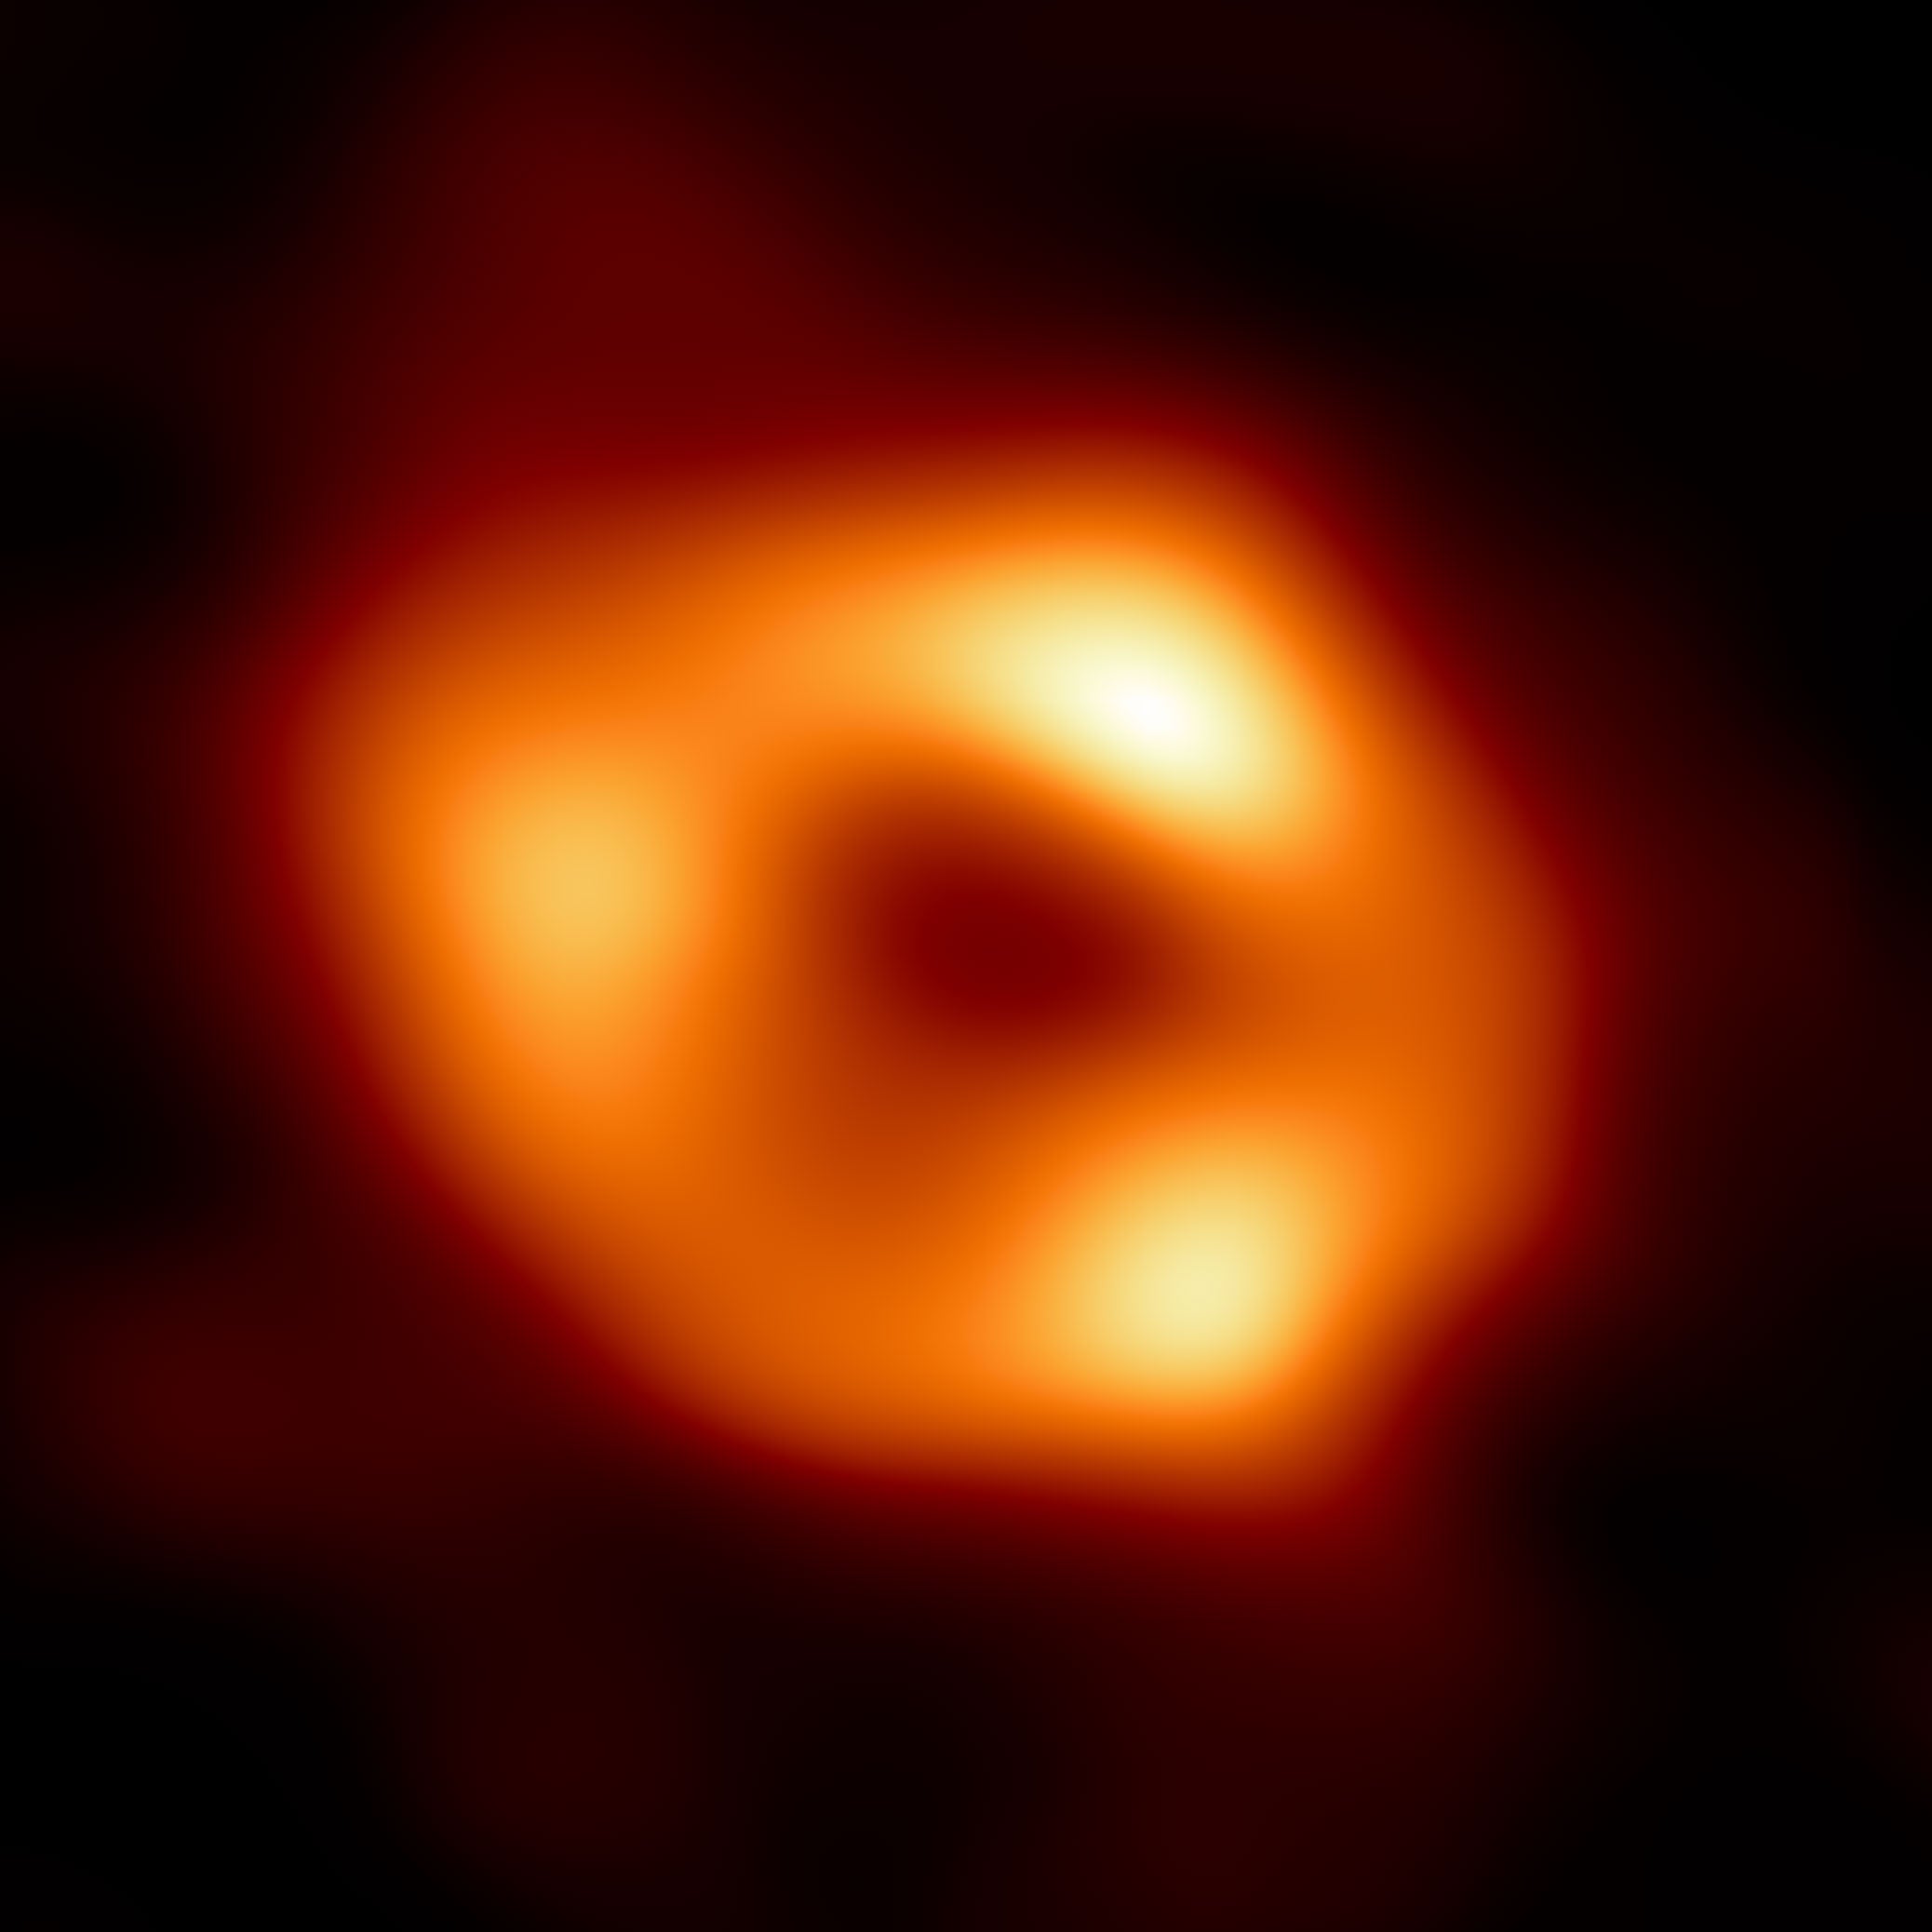 A bright orange ring with three very bright spots almost equally spaced along the ring. Smudges of orange light extend from the ring towards the edges of the image